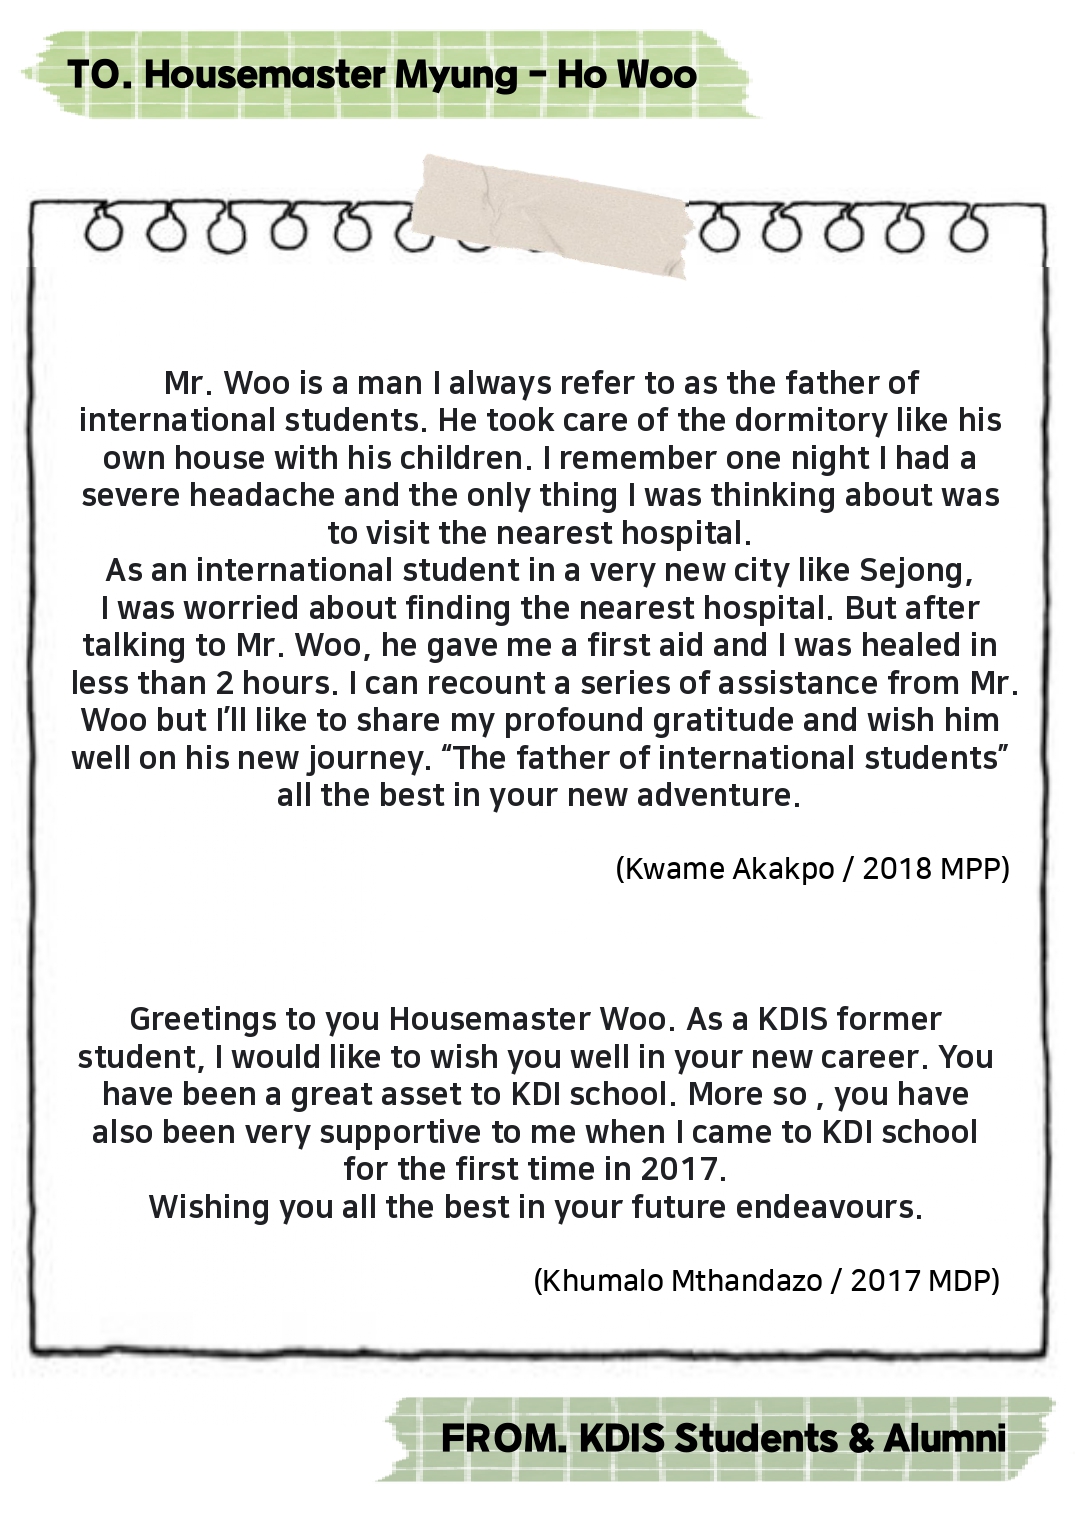 Thank you Housemaster Myung-ho Woo -Messages from KDIS Students and Alumni 사진18